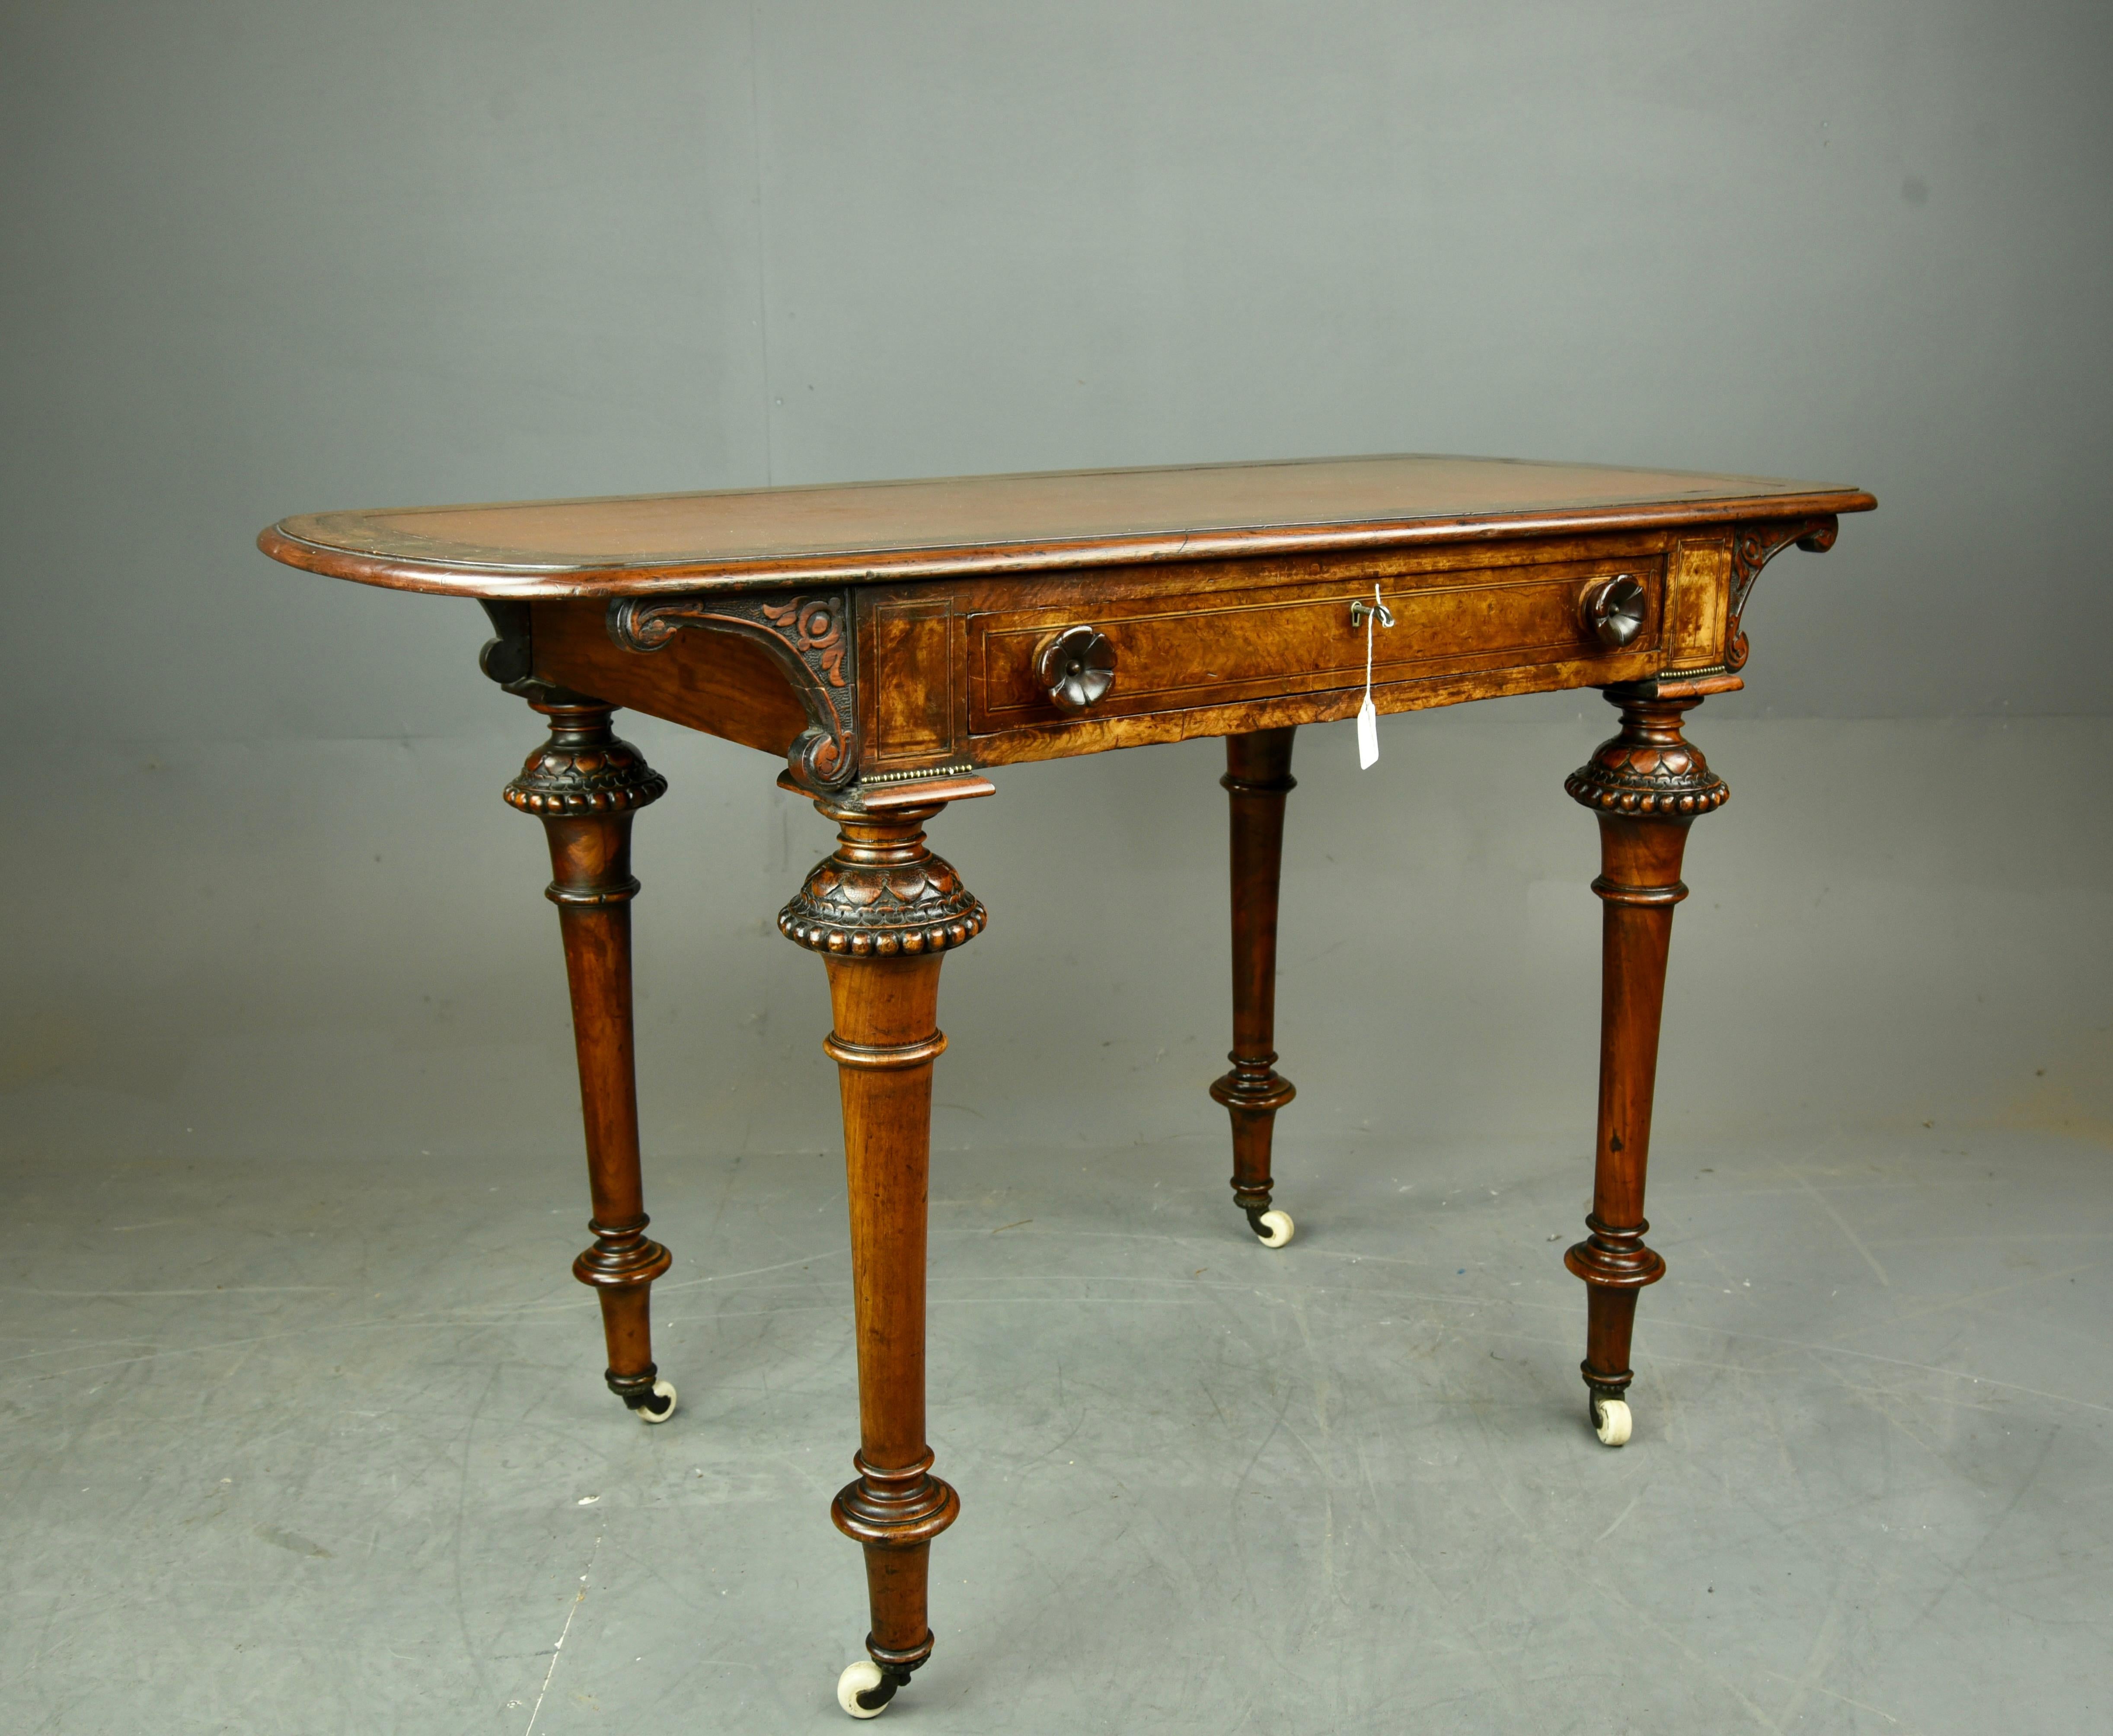 Fine Quality Victorian burr walnut ladies writing table .
This unusual writing table Stands on fine tuned legs with ornate carved crowns to the top .
standing on original brass and porcelain castors ,the single full width drawer retain the original